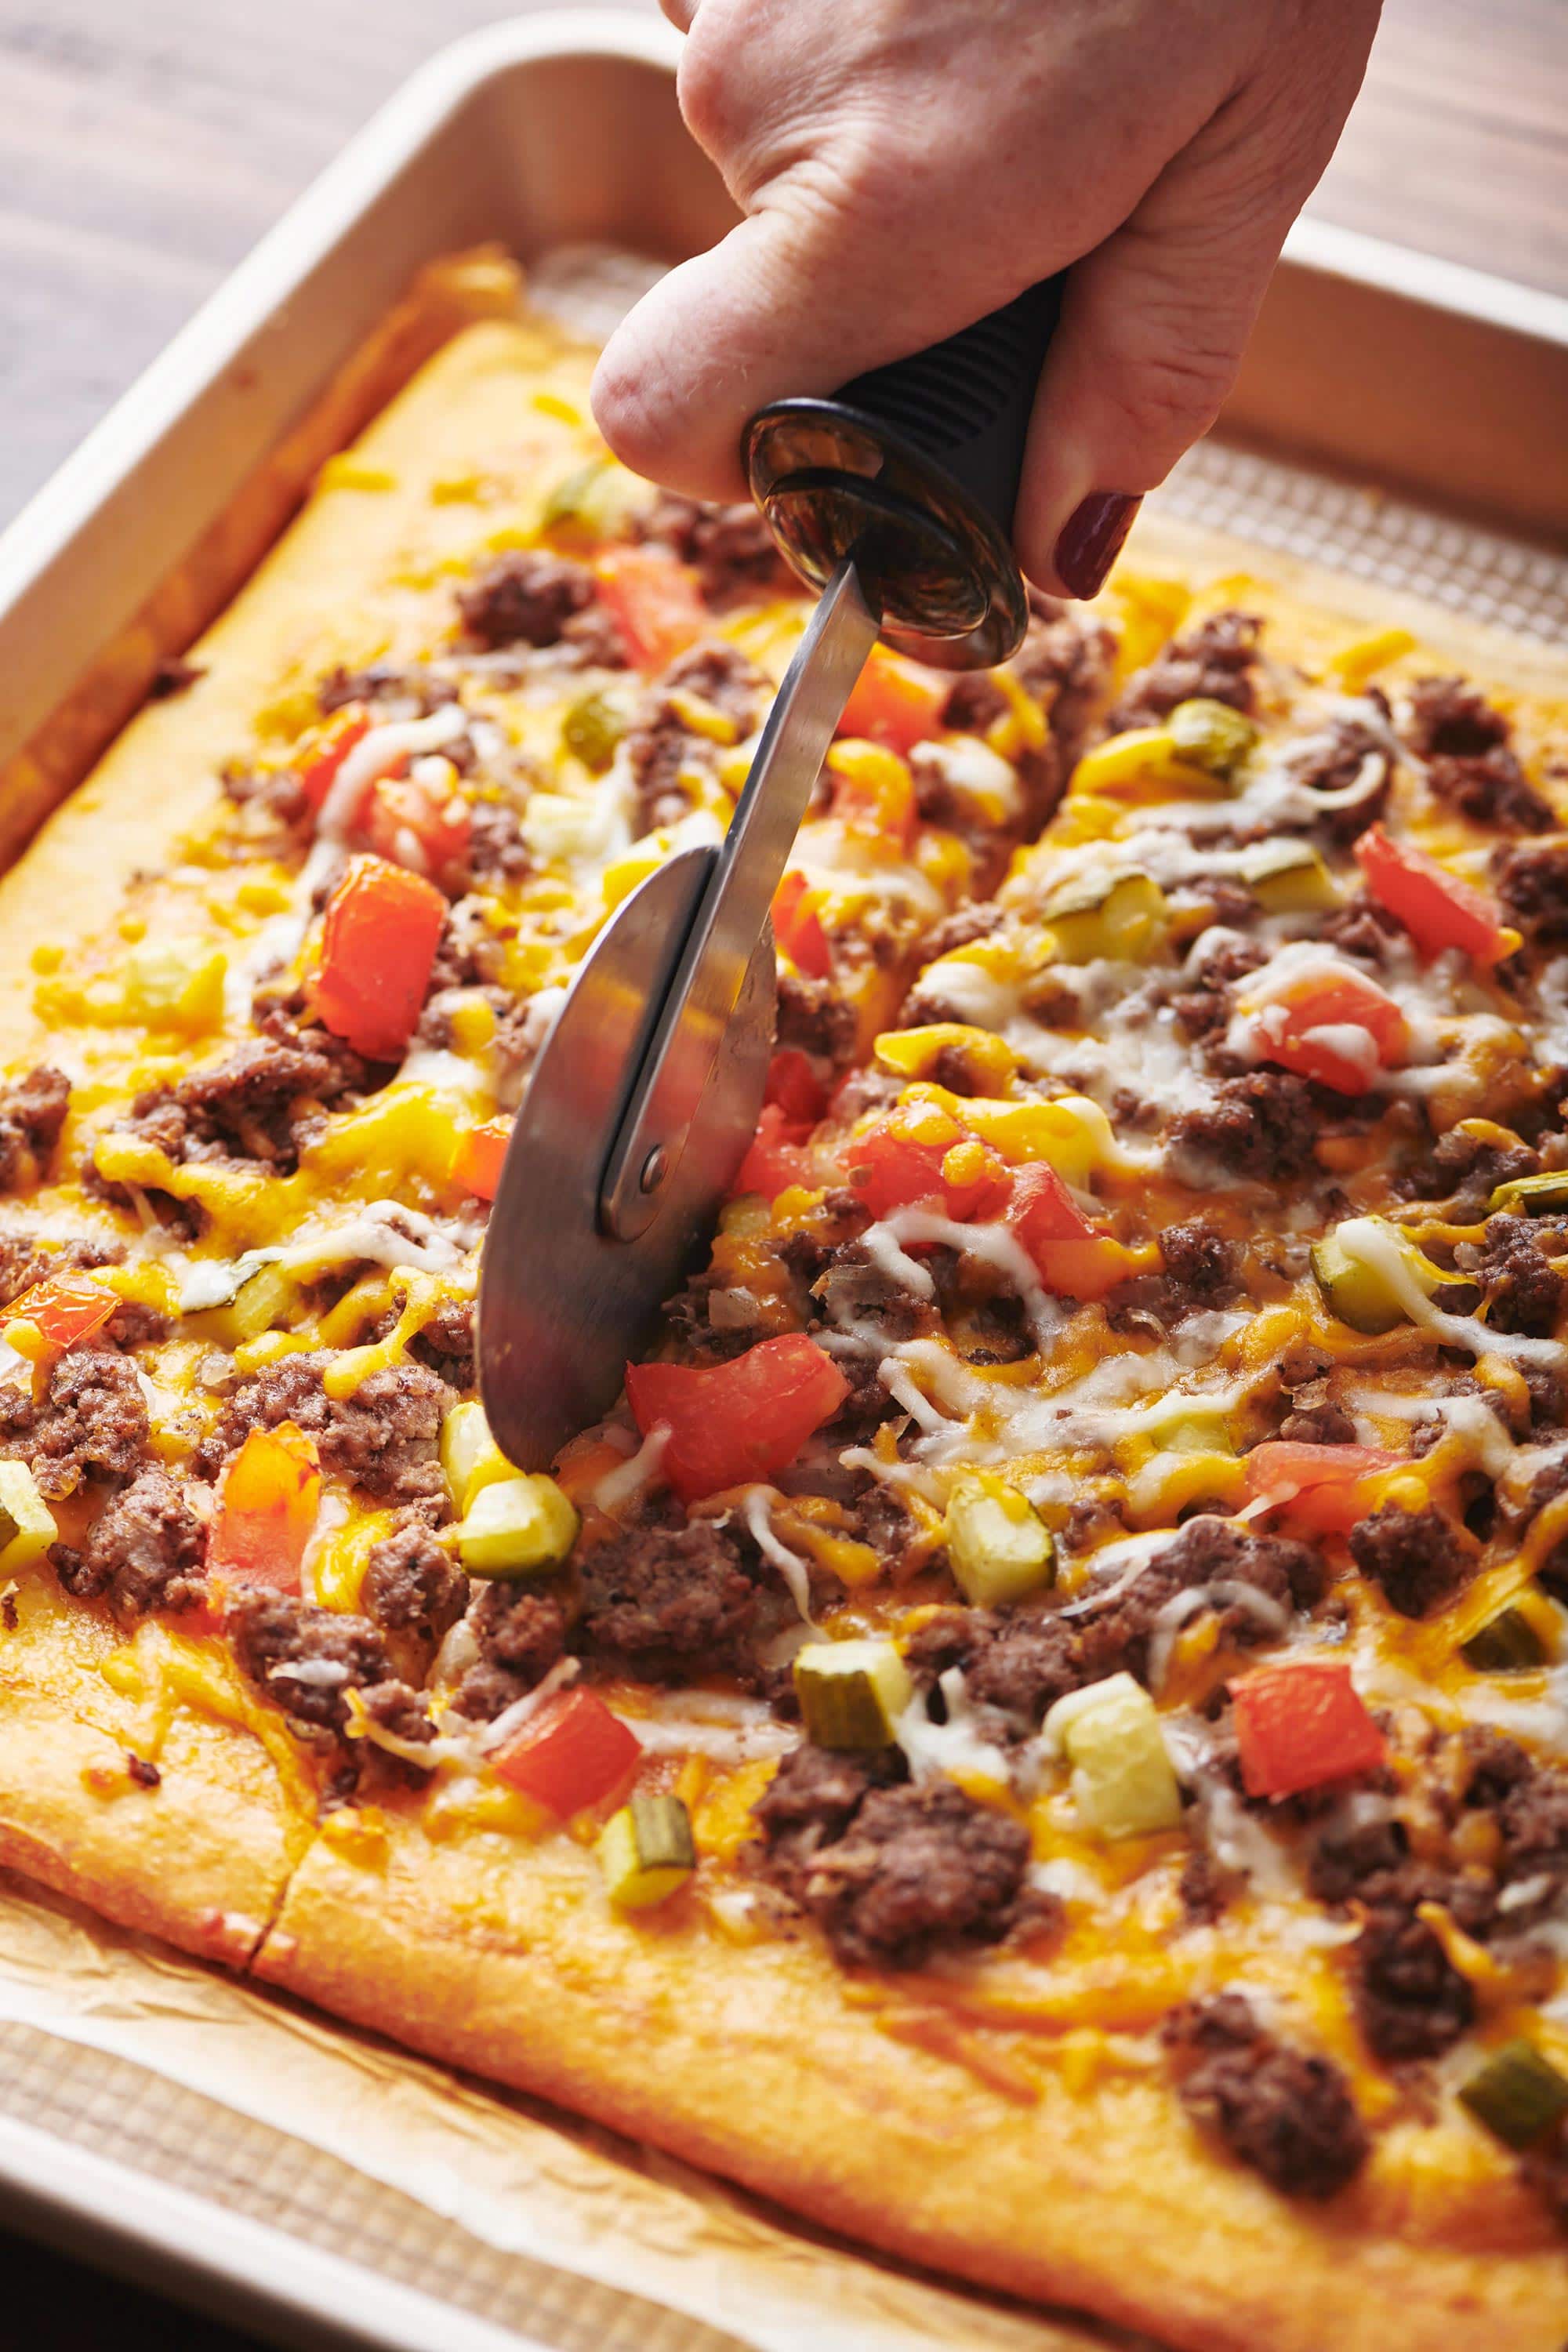 Woman using a pizza cutter to slice a Cheeseburger Pizza.